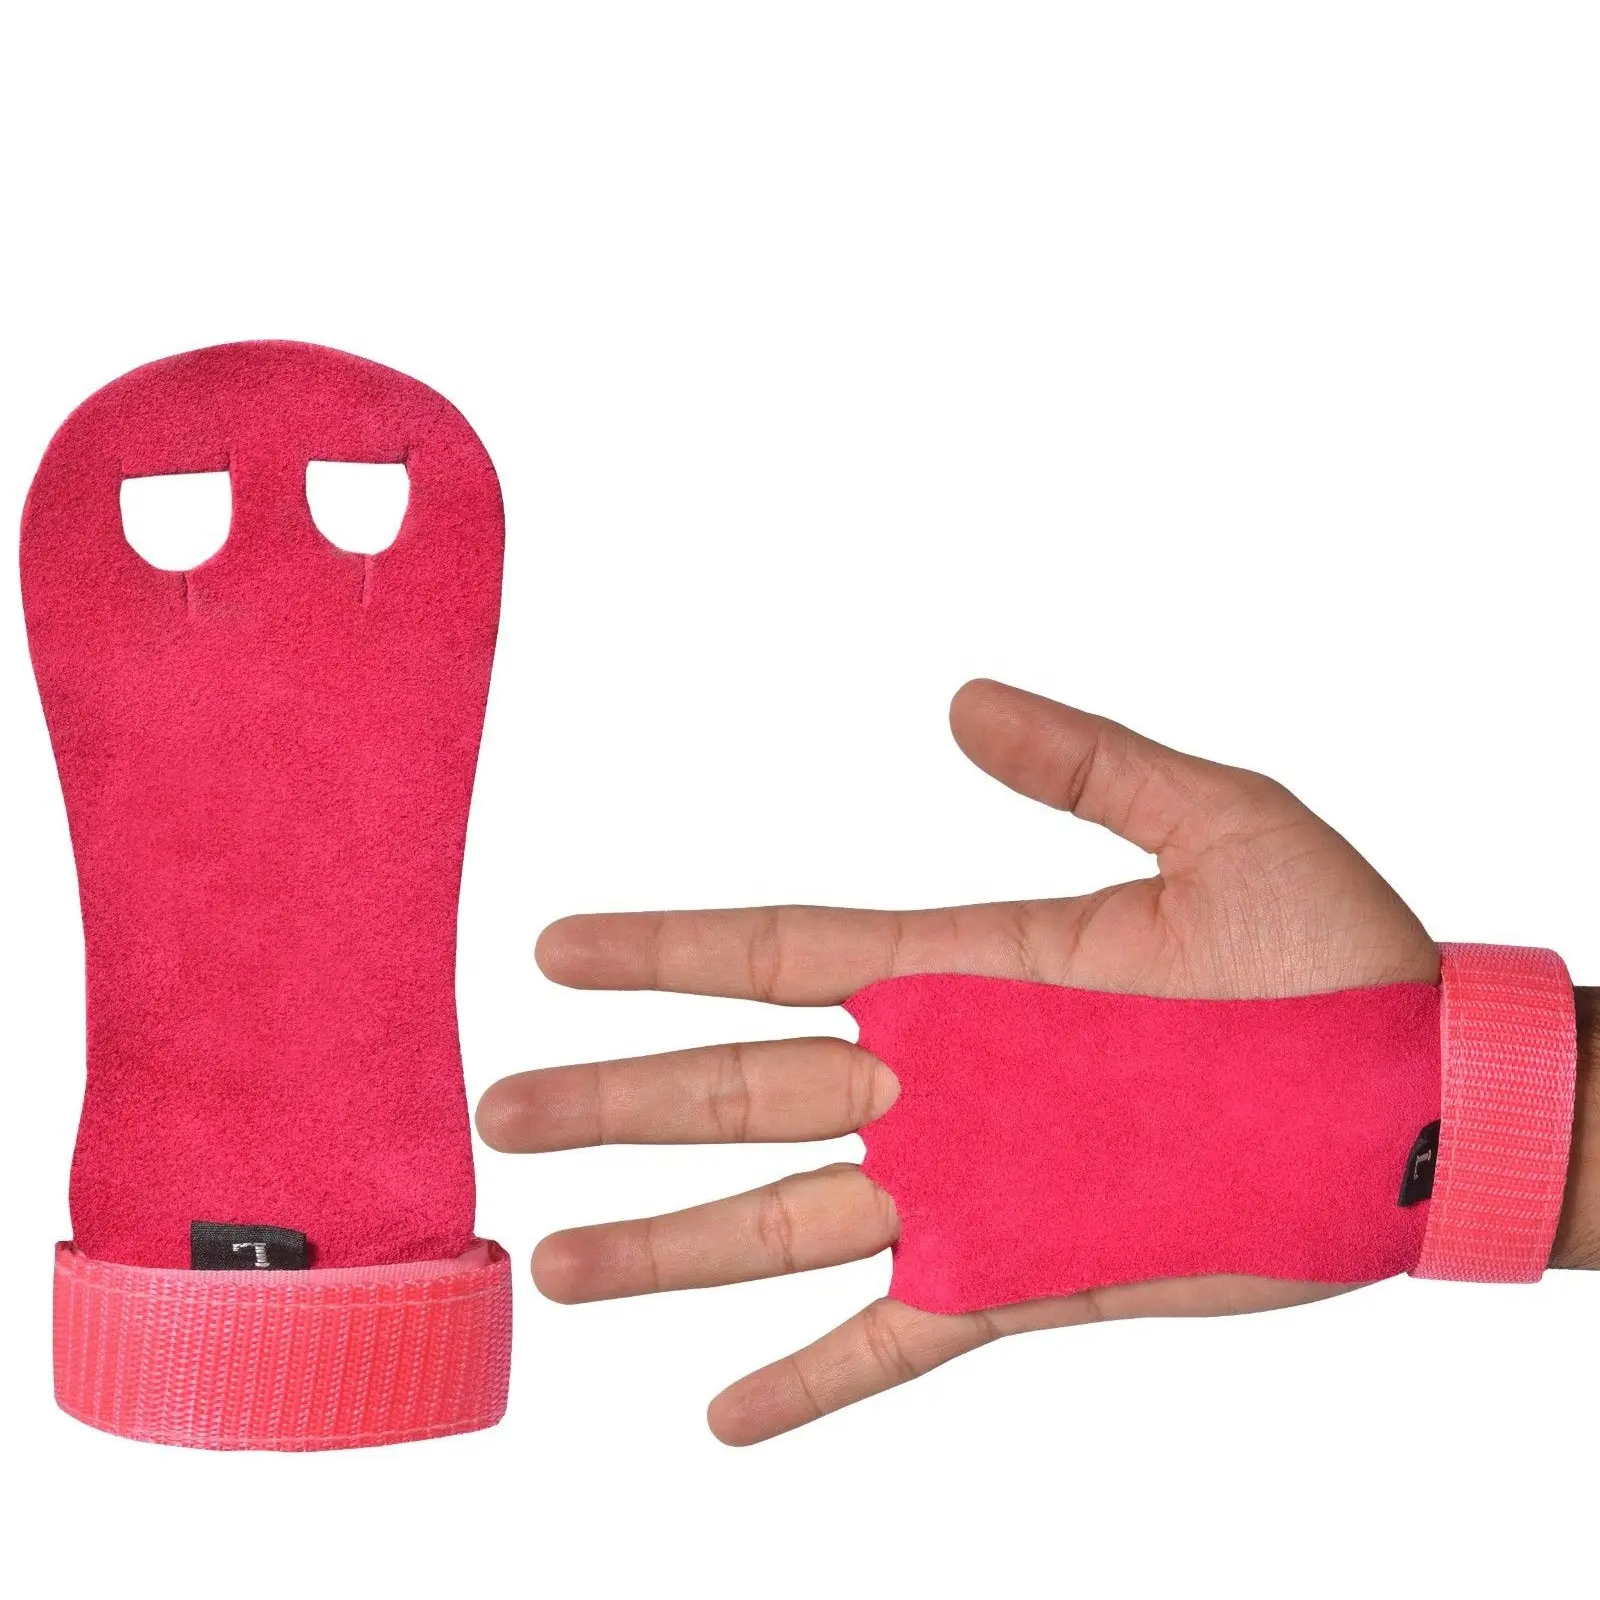 3 Holes Fitness Leather Weight Lifting Gym Palm protector gloves with Gymnastic Hand Grip Wrist Support Palm Protector